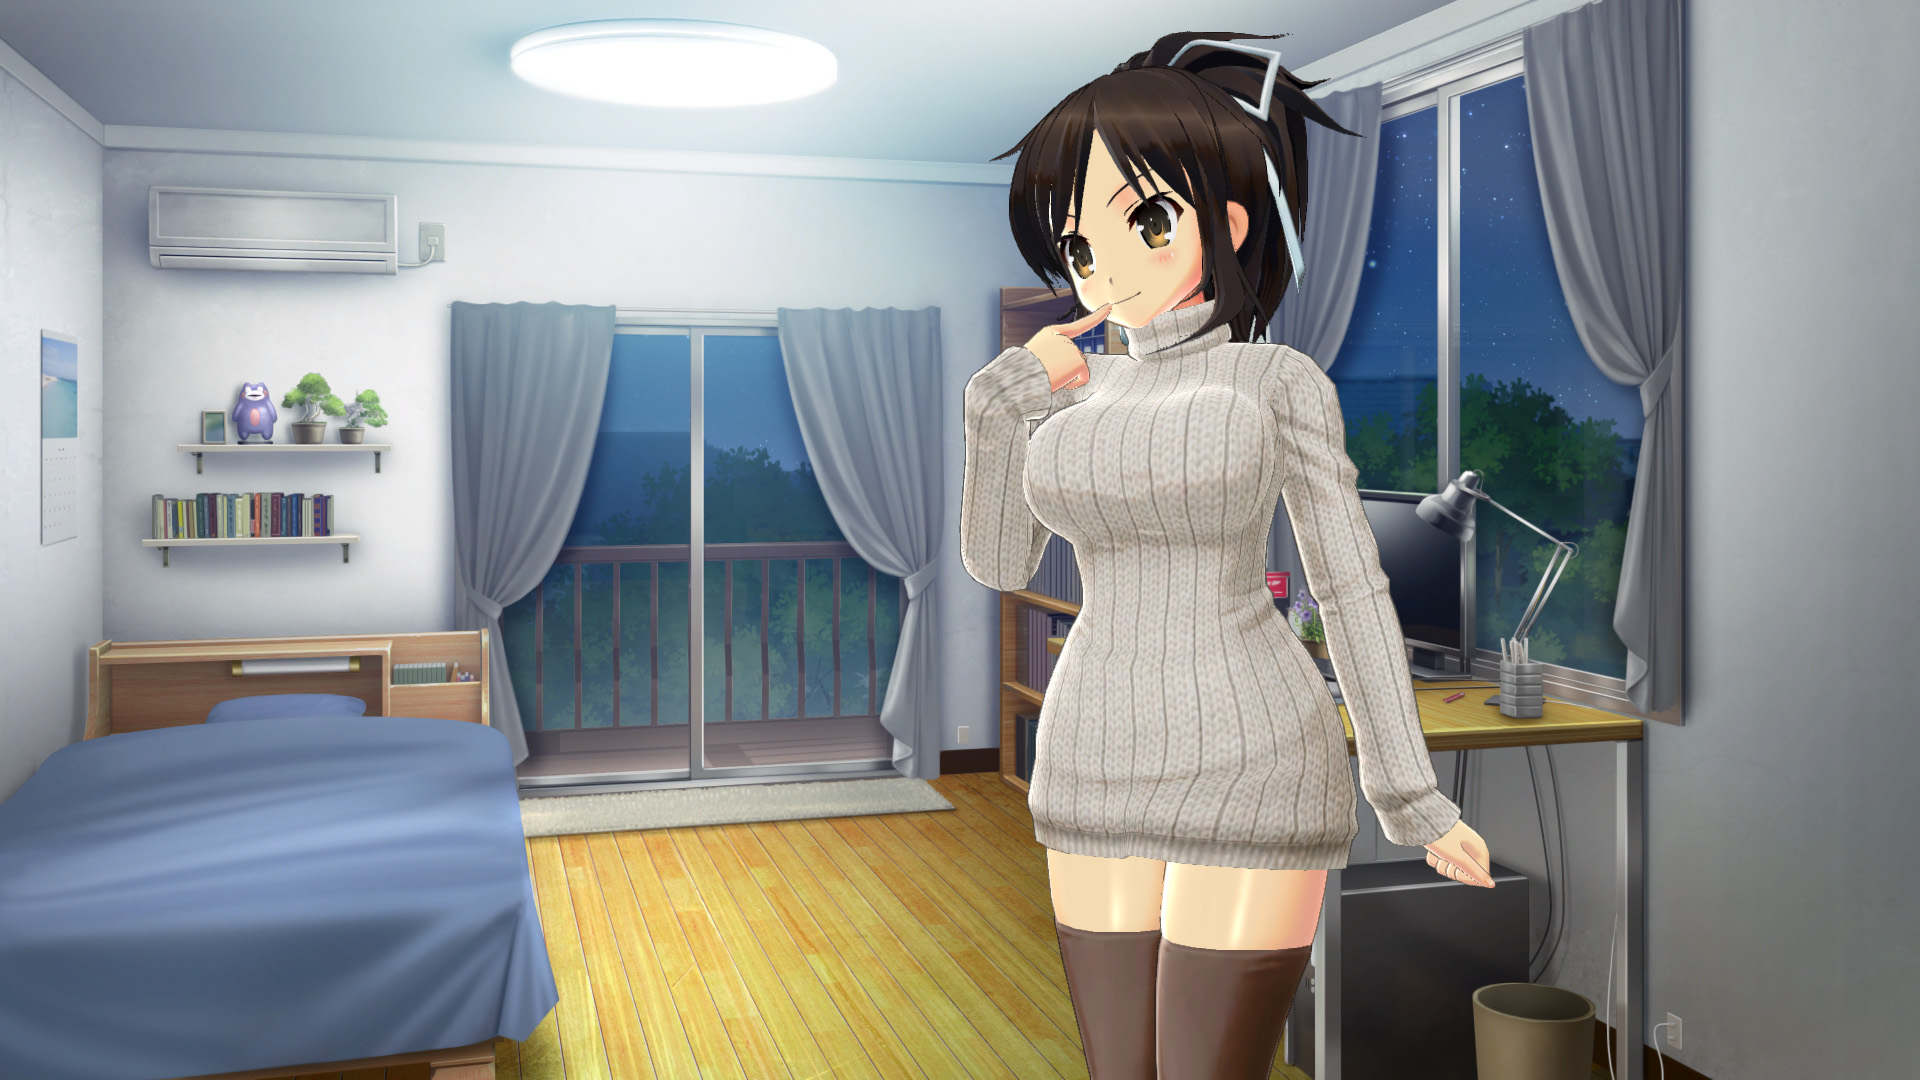 Senran Kagura: Reflexions - Newlyweds Outfit Set official promotional image  - MobyGames